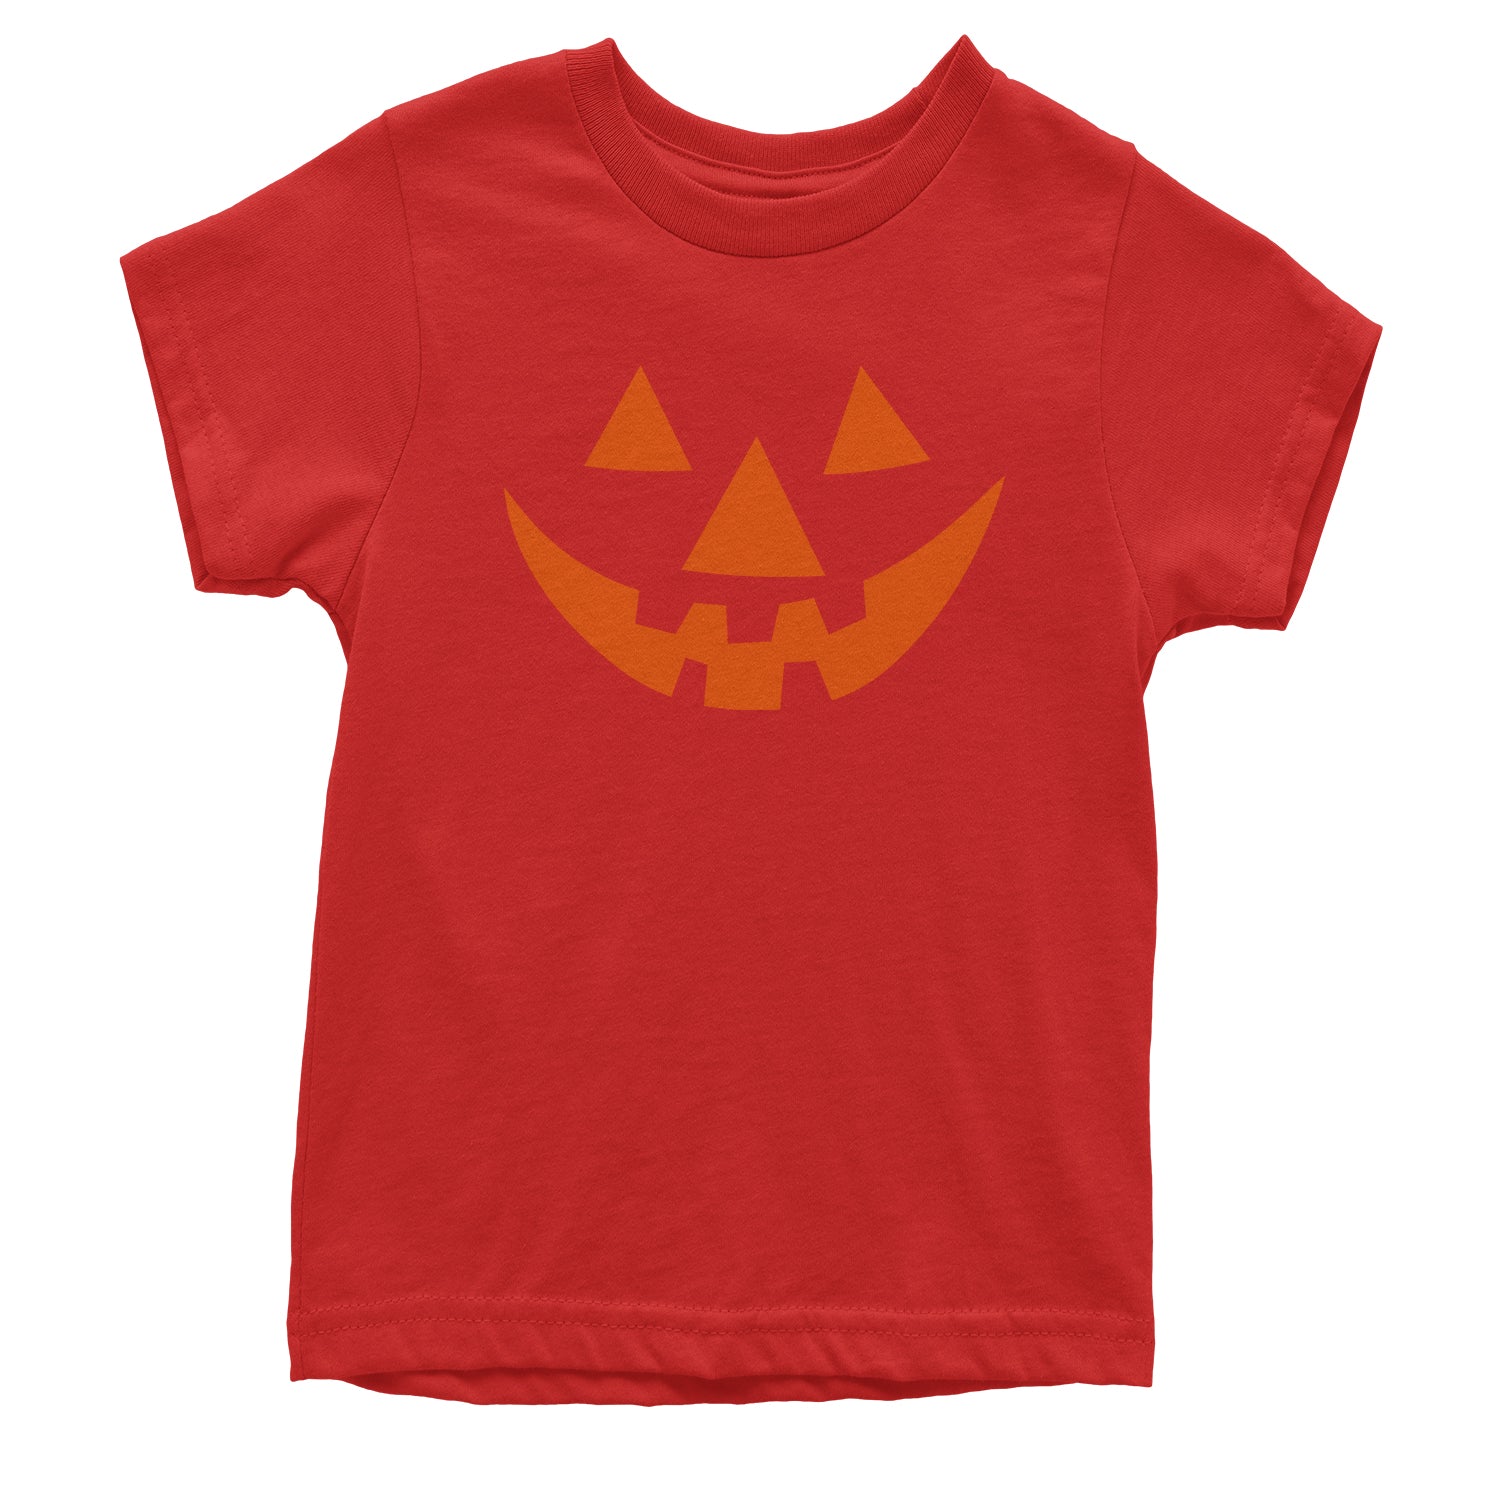 Pumpkin Face (Orange Print) Youth T-shirt costume, dress, dressup, eve, halloween, hallows, jackolantern, party, up by Expression Tees